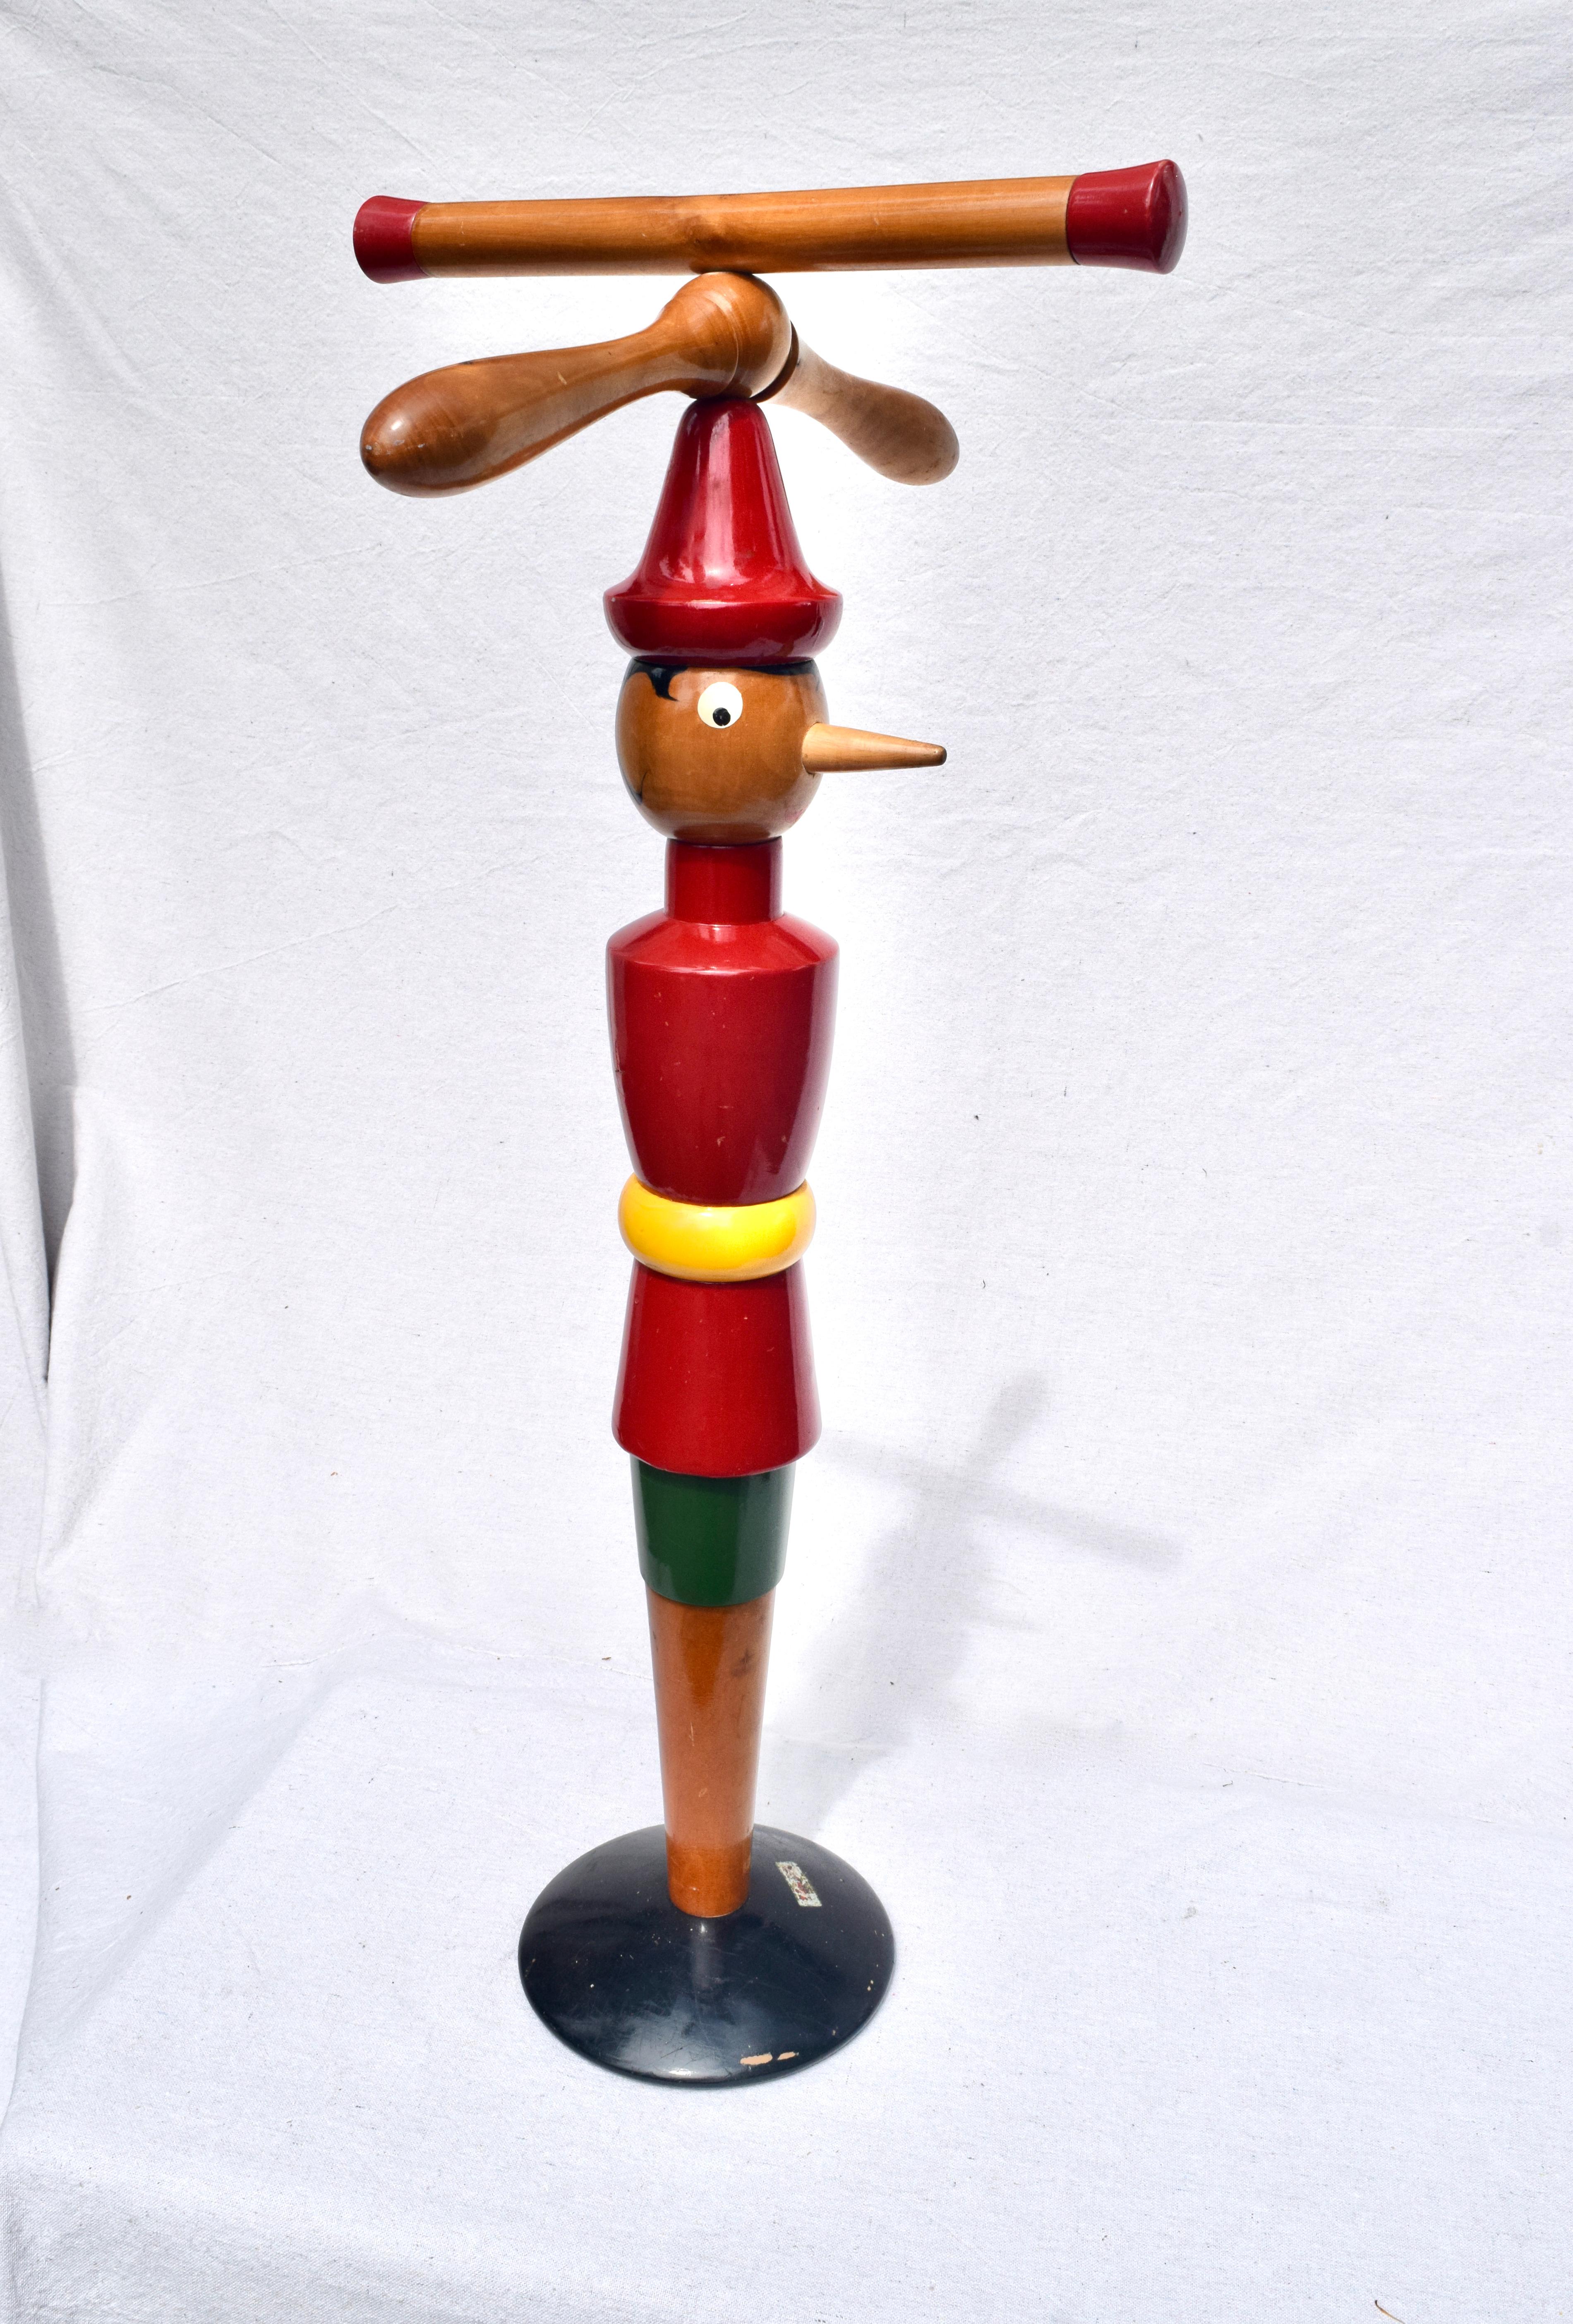 Mid-Century Modern Valet Stands Pinocchio & Jiminy Cricket, 1940s Italian Design For Sale